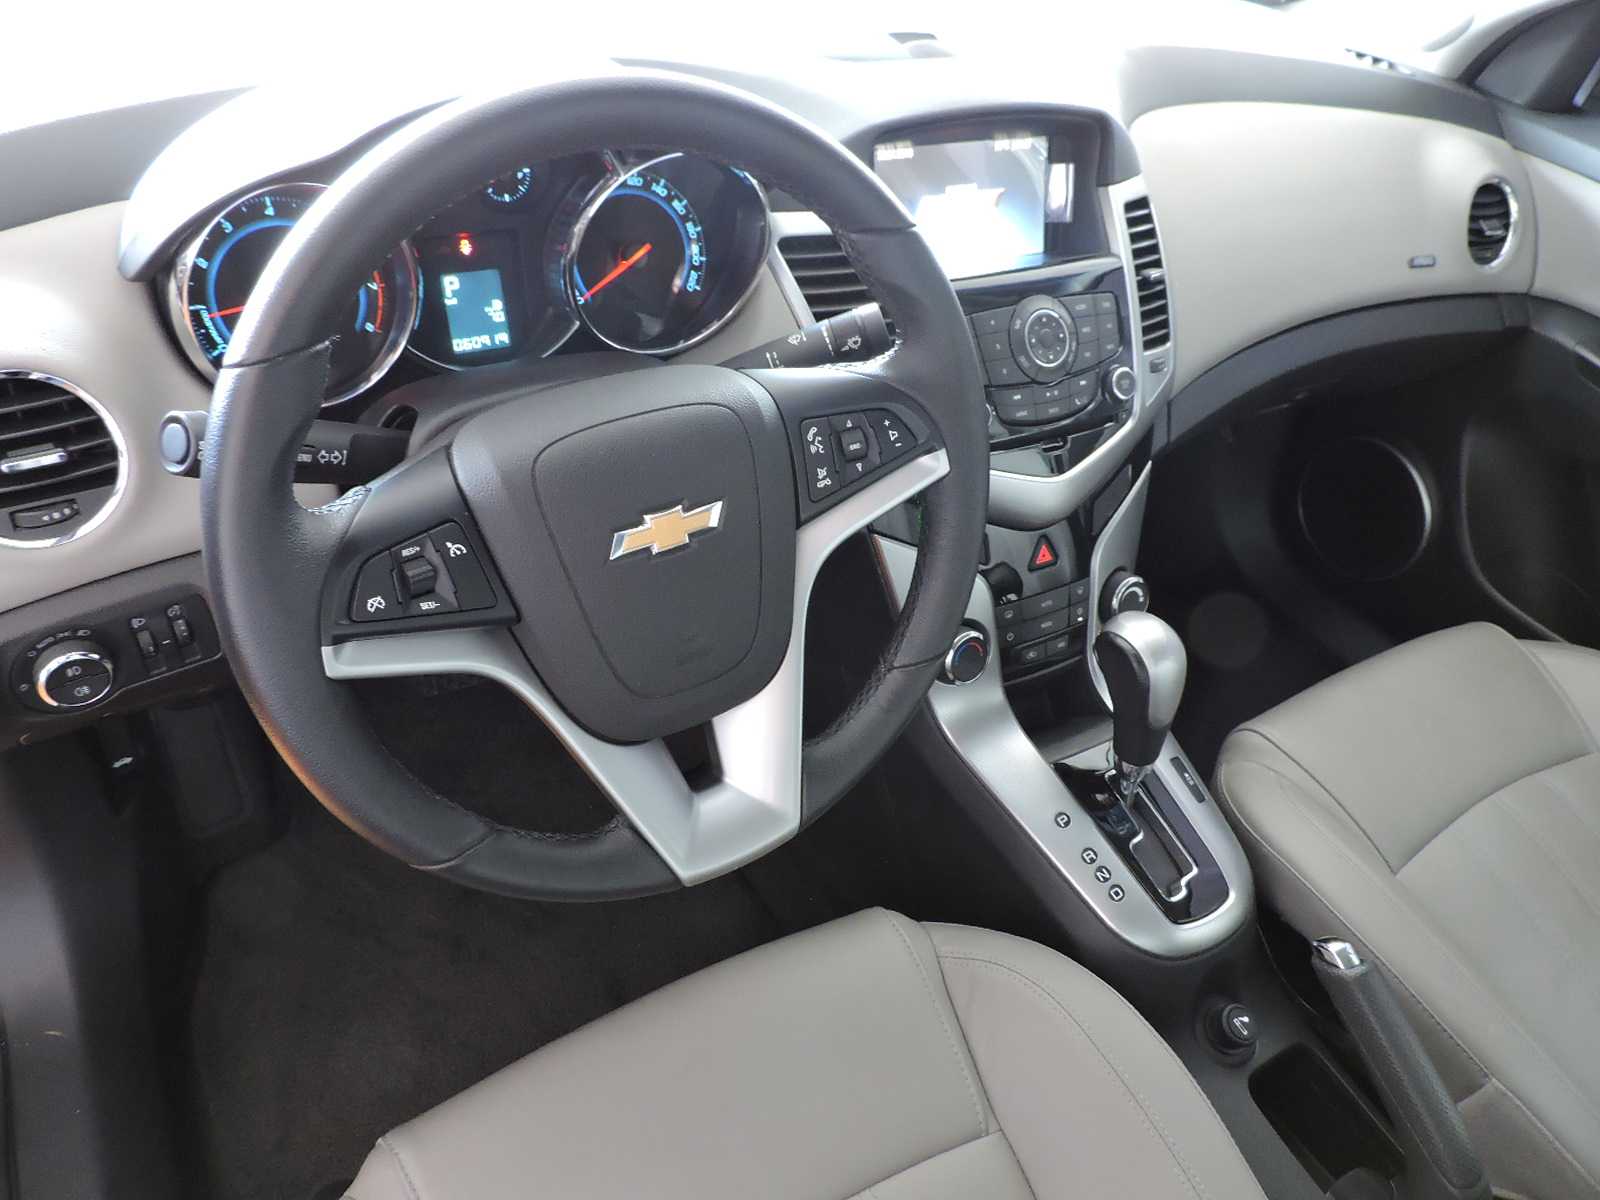 What is the difference between chevrolet lts and lss?